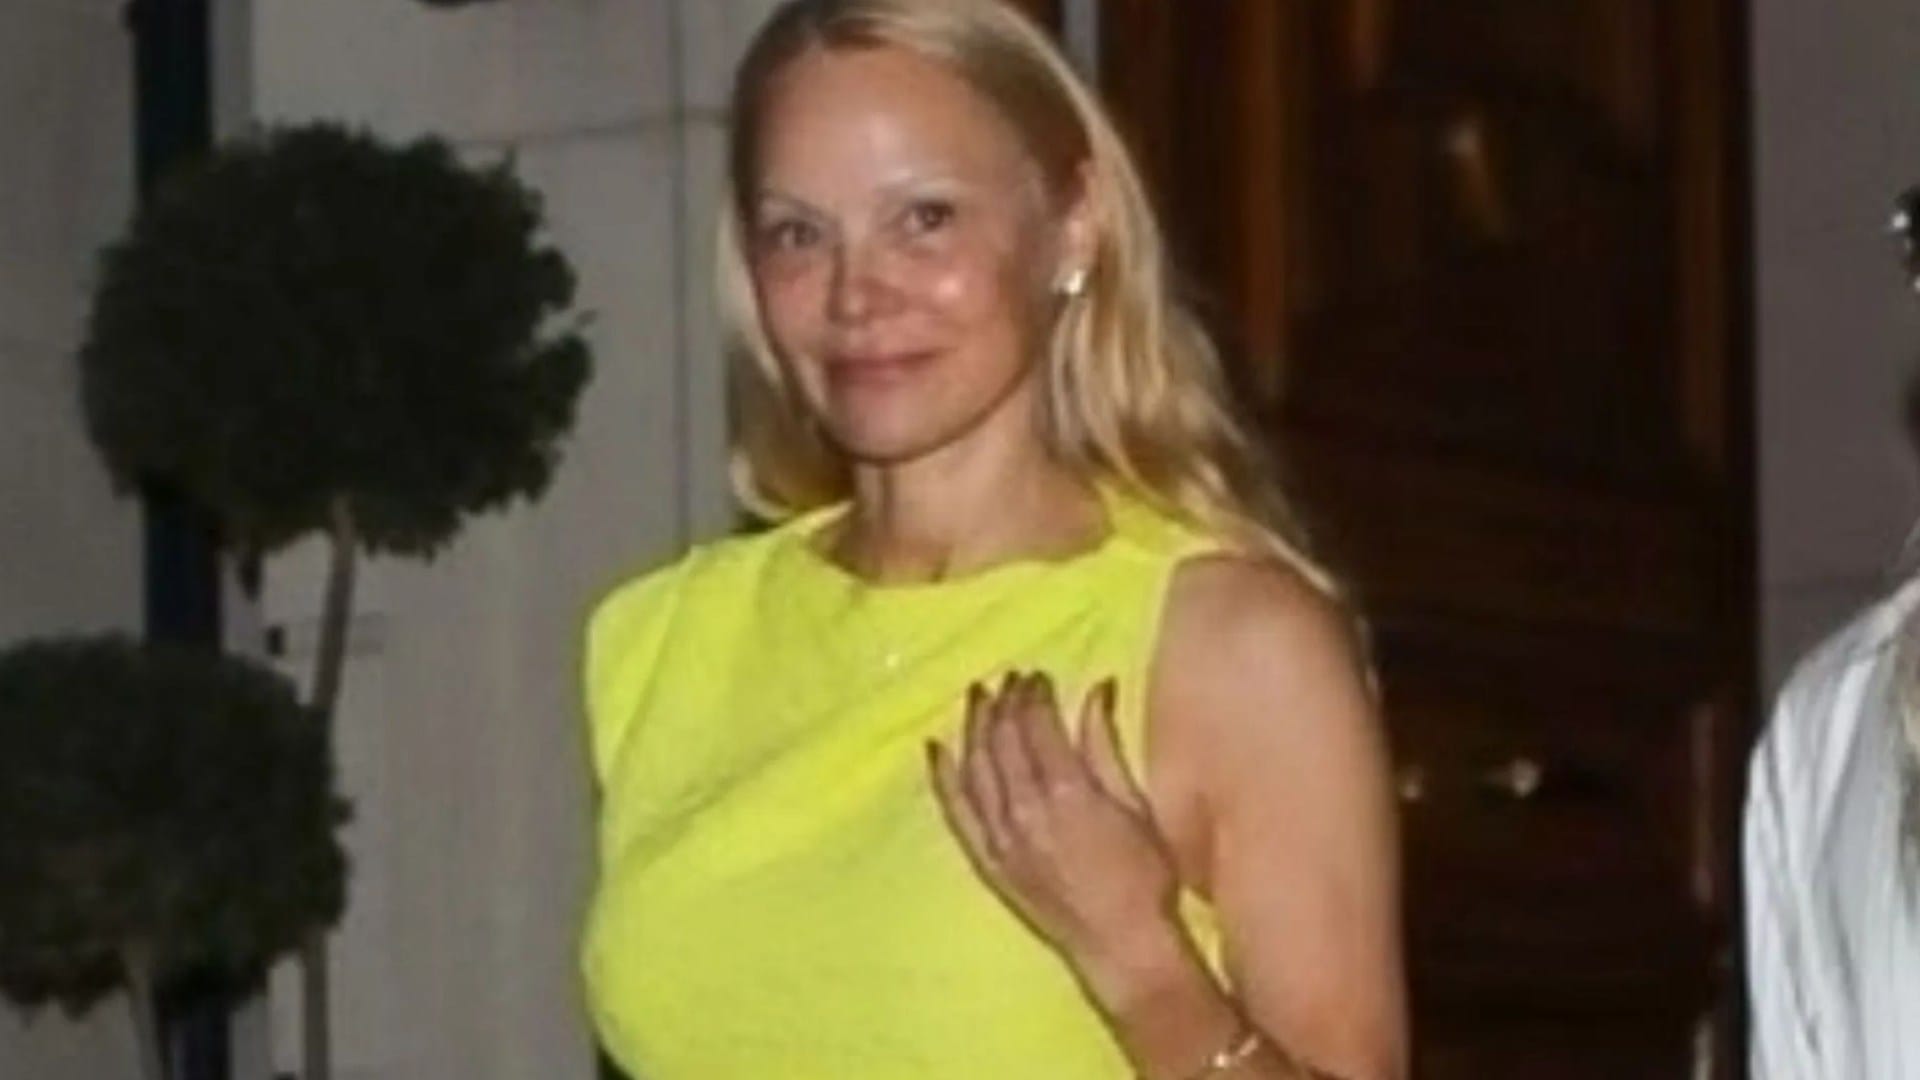 Nineties TV megastar unrecognisable in bright yellow dress as she parties 22 years after iconic show was cancelled